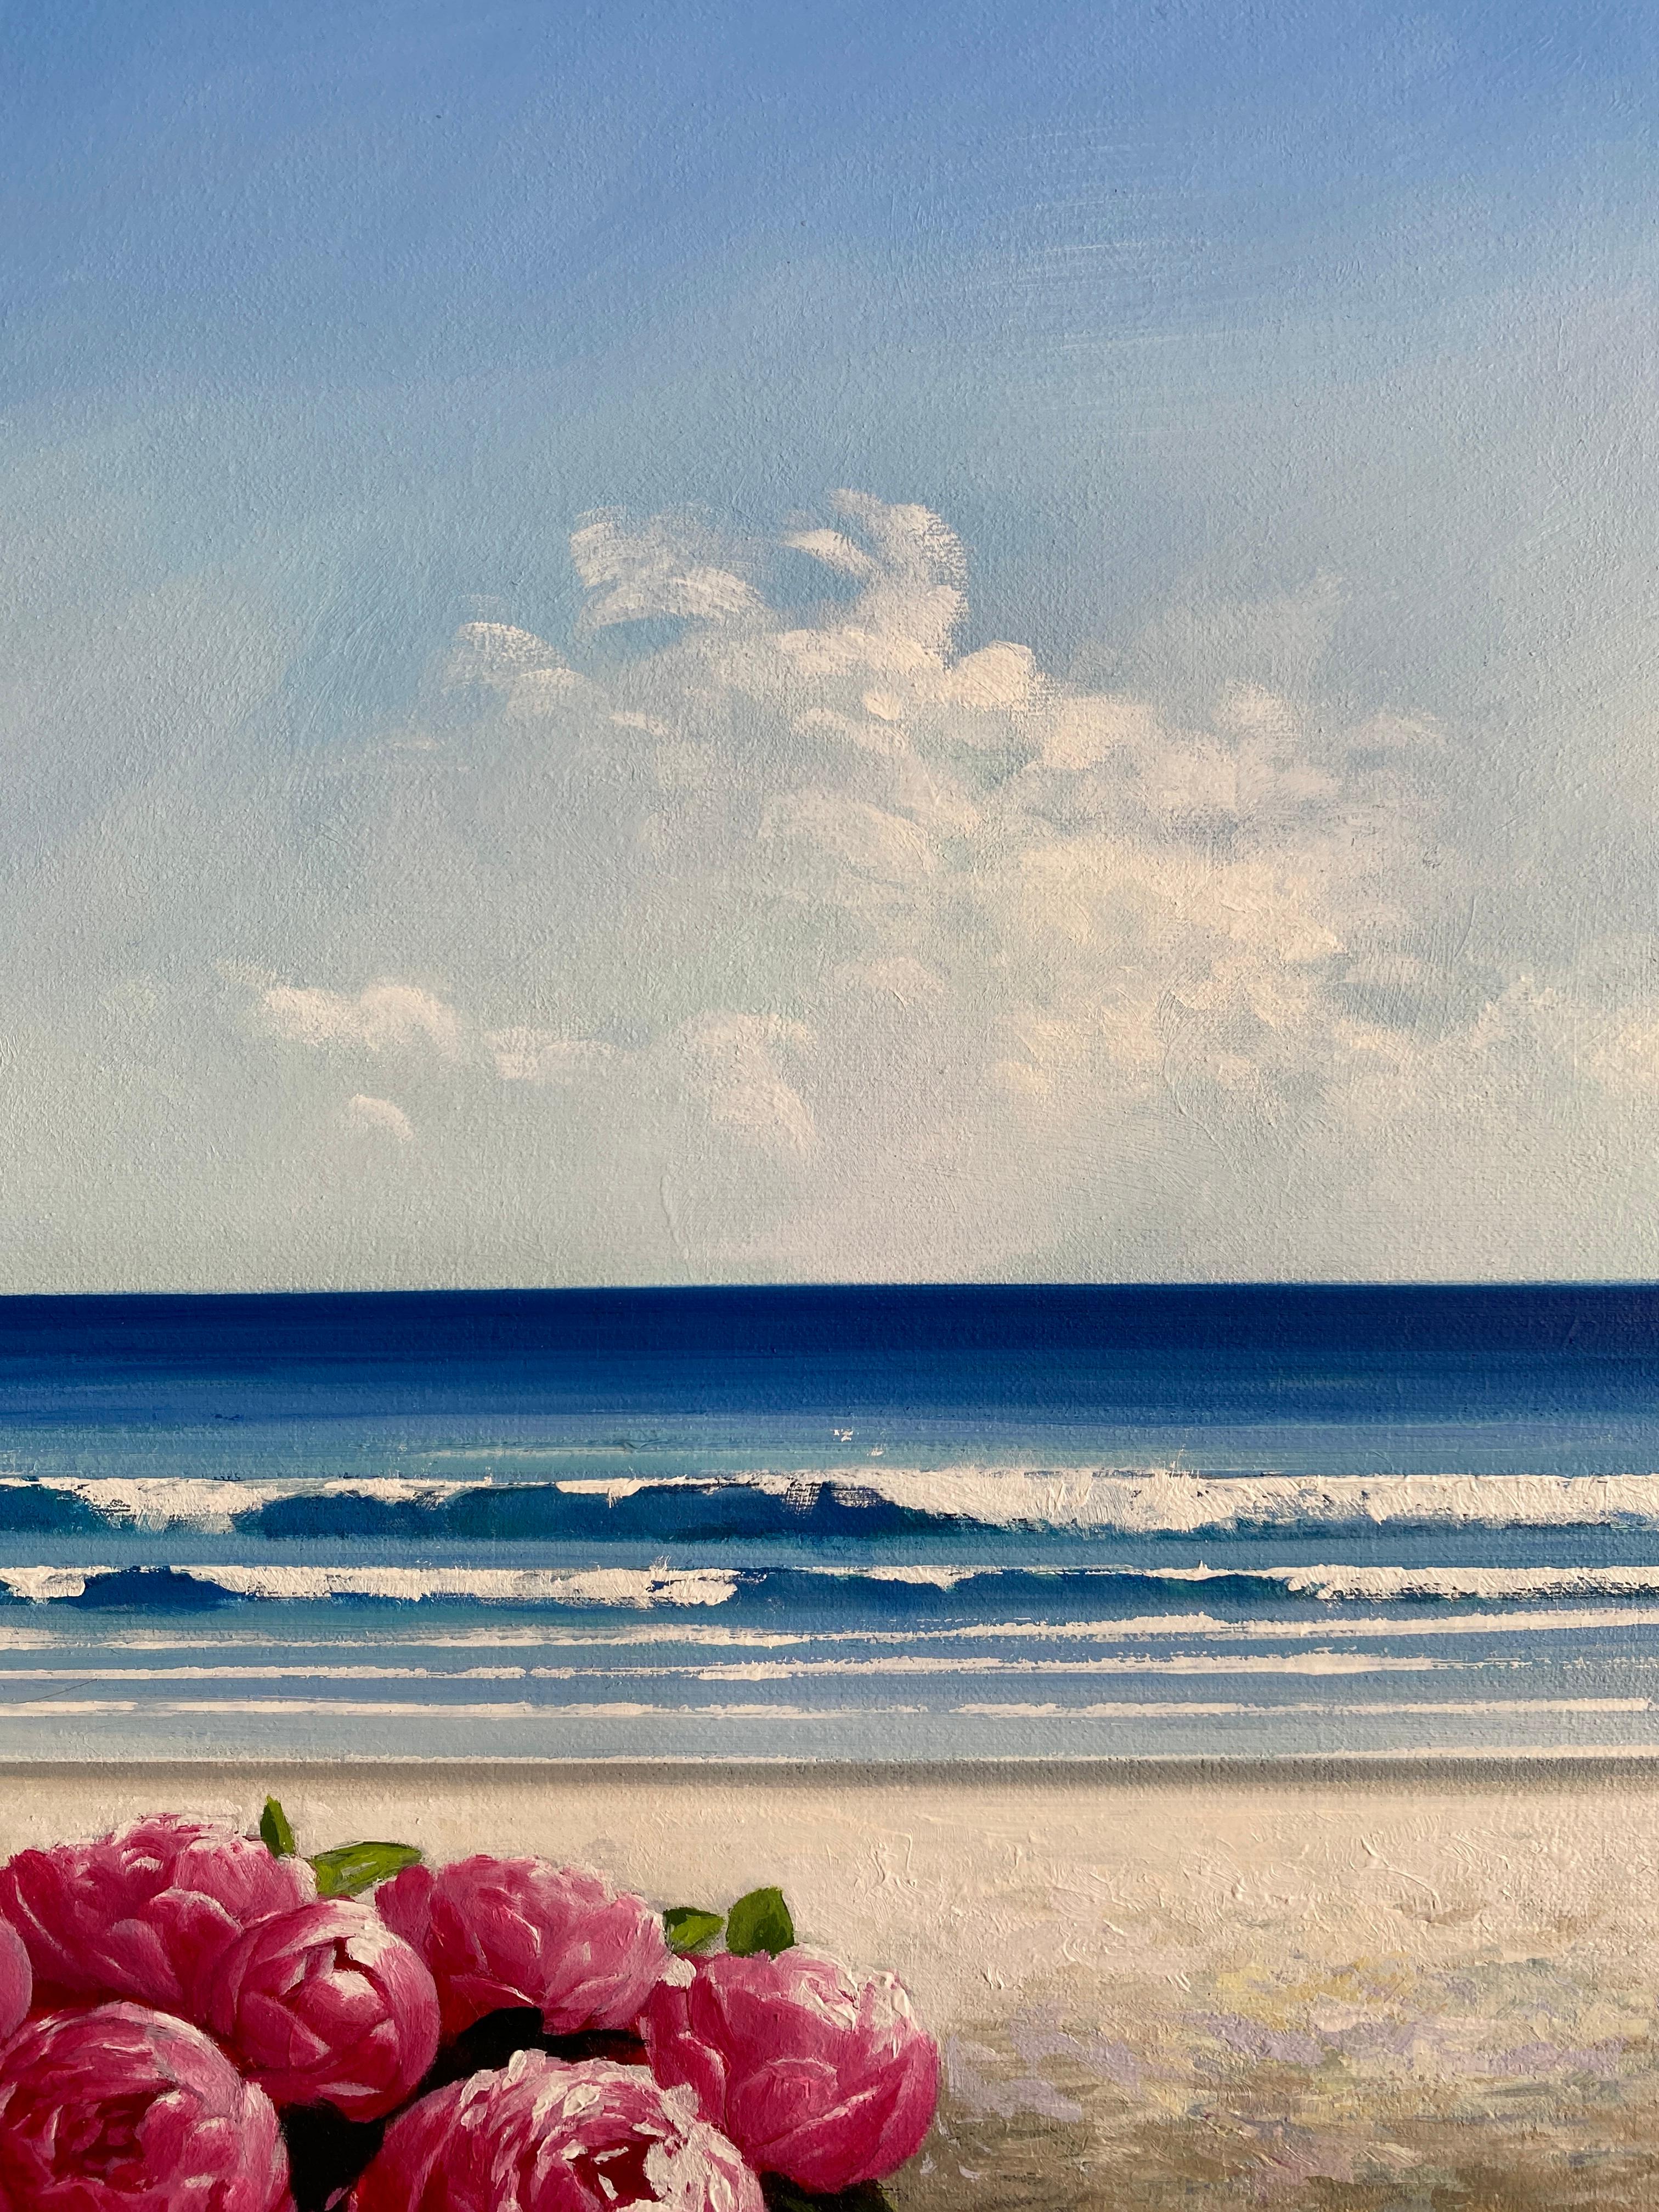 Peonies and the sea - Original seascape - Oil painting - Painting by Luis Fuentes